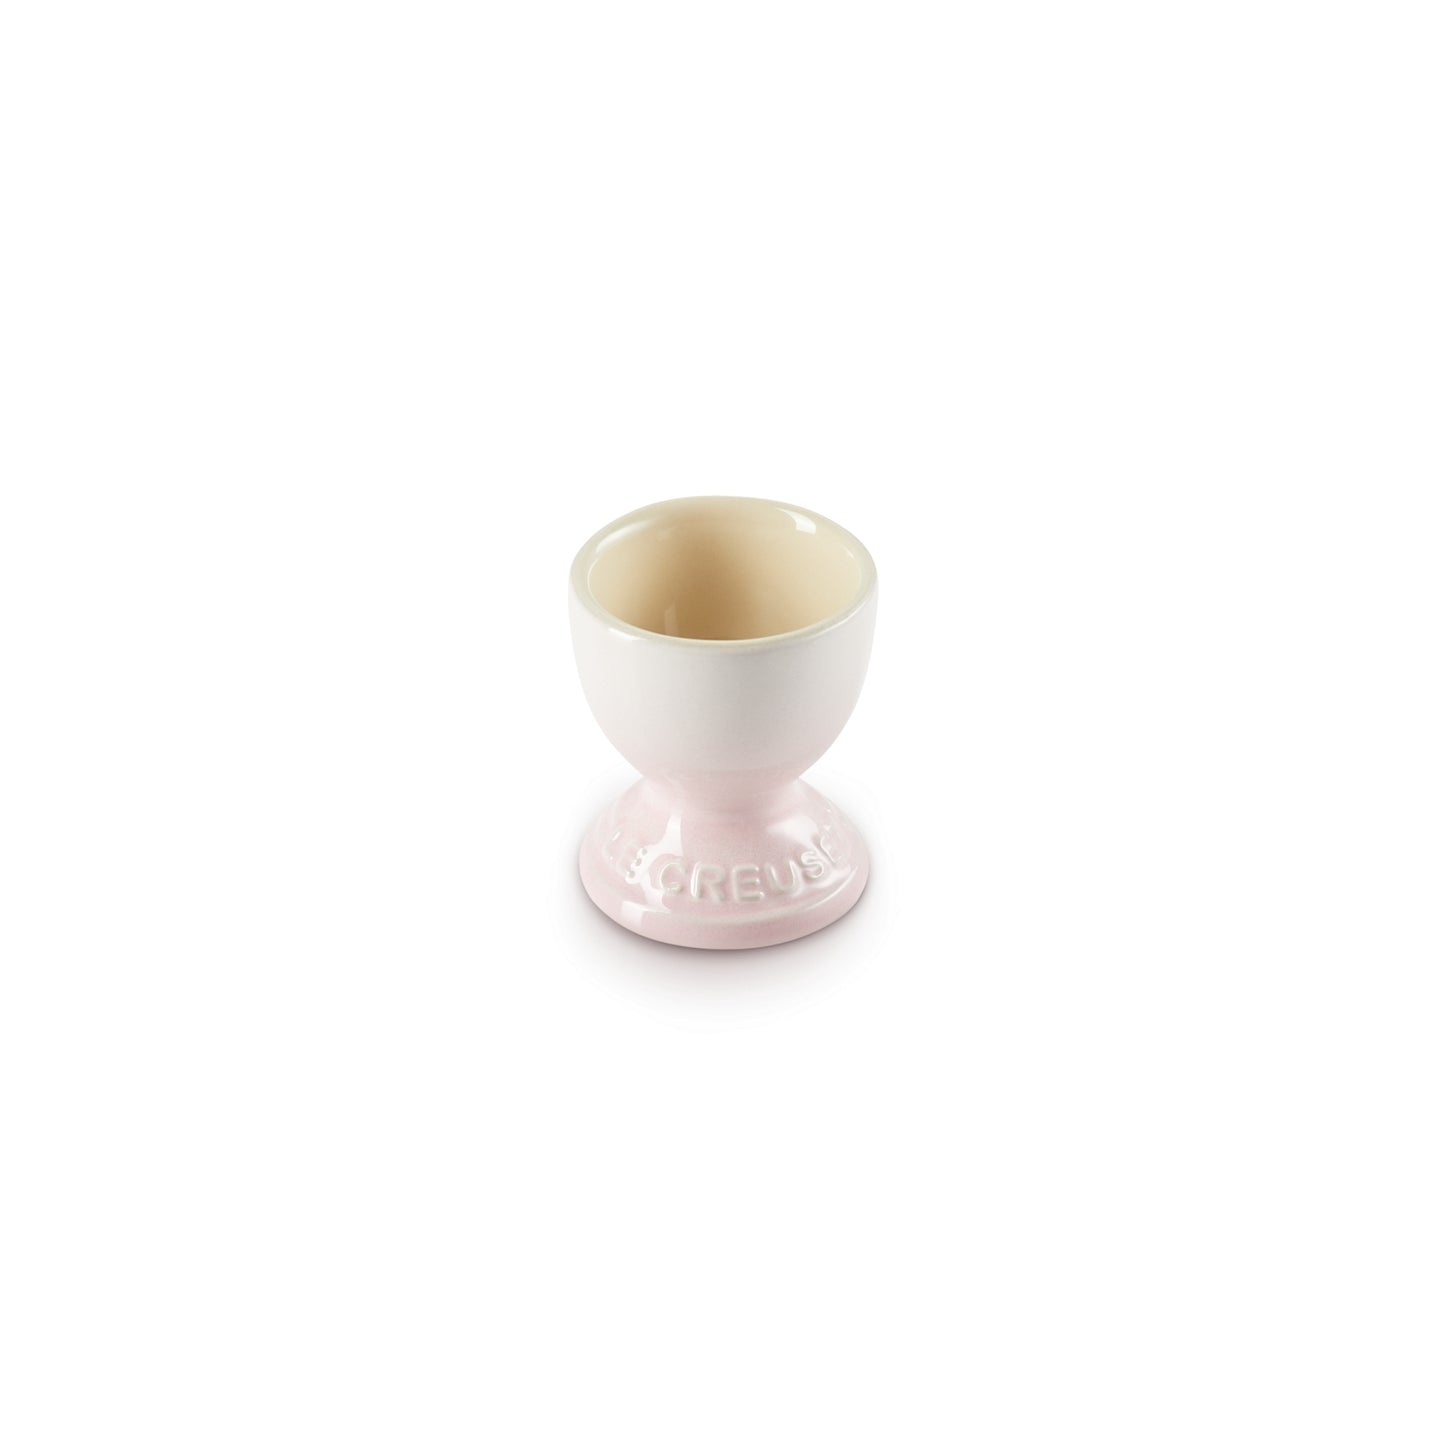 Le Creuset Stoneware Egg Cup in Shell Pink